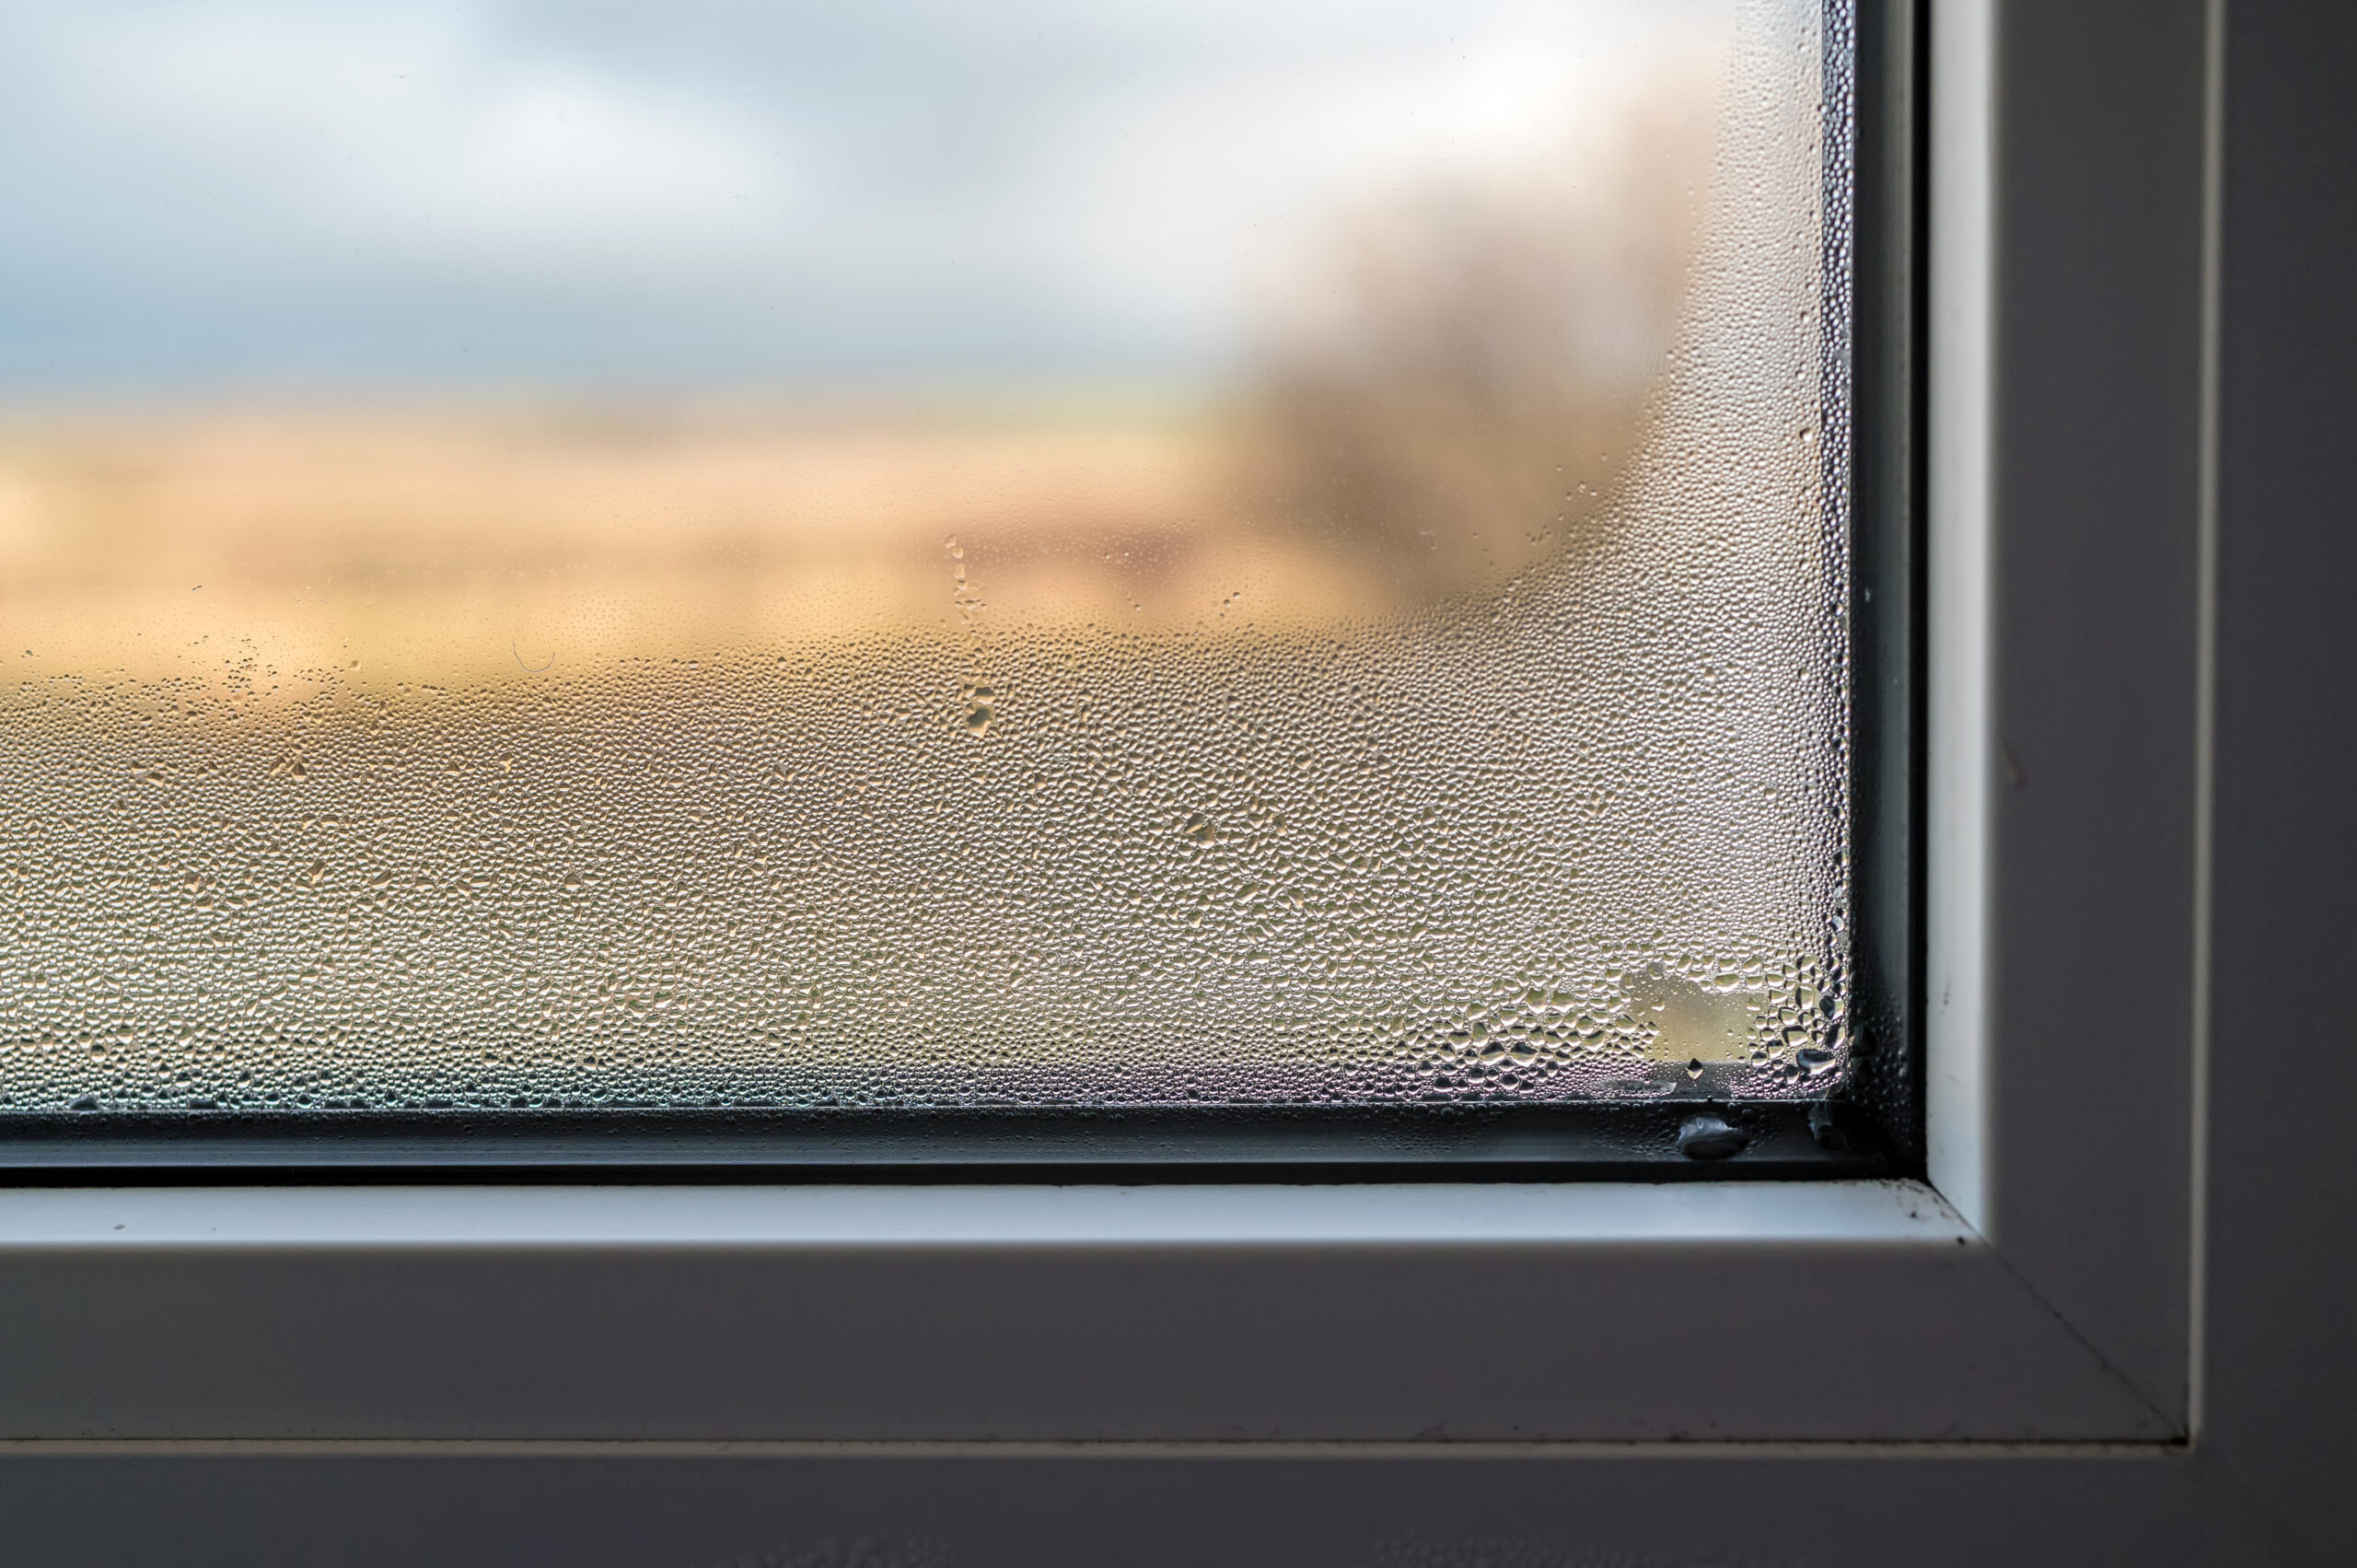 Mold,formation,through,fogged,window,pane,due,to,poor,ventilation